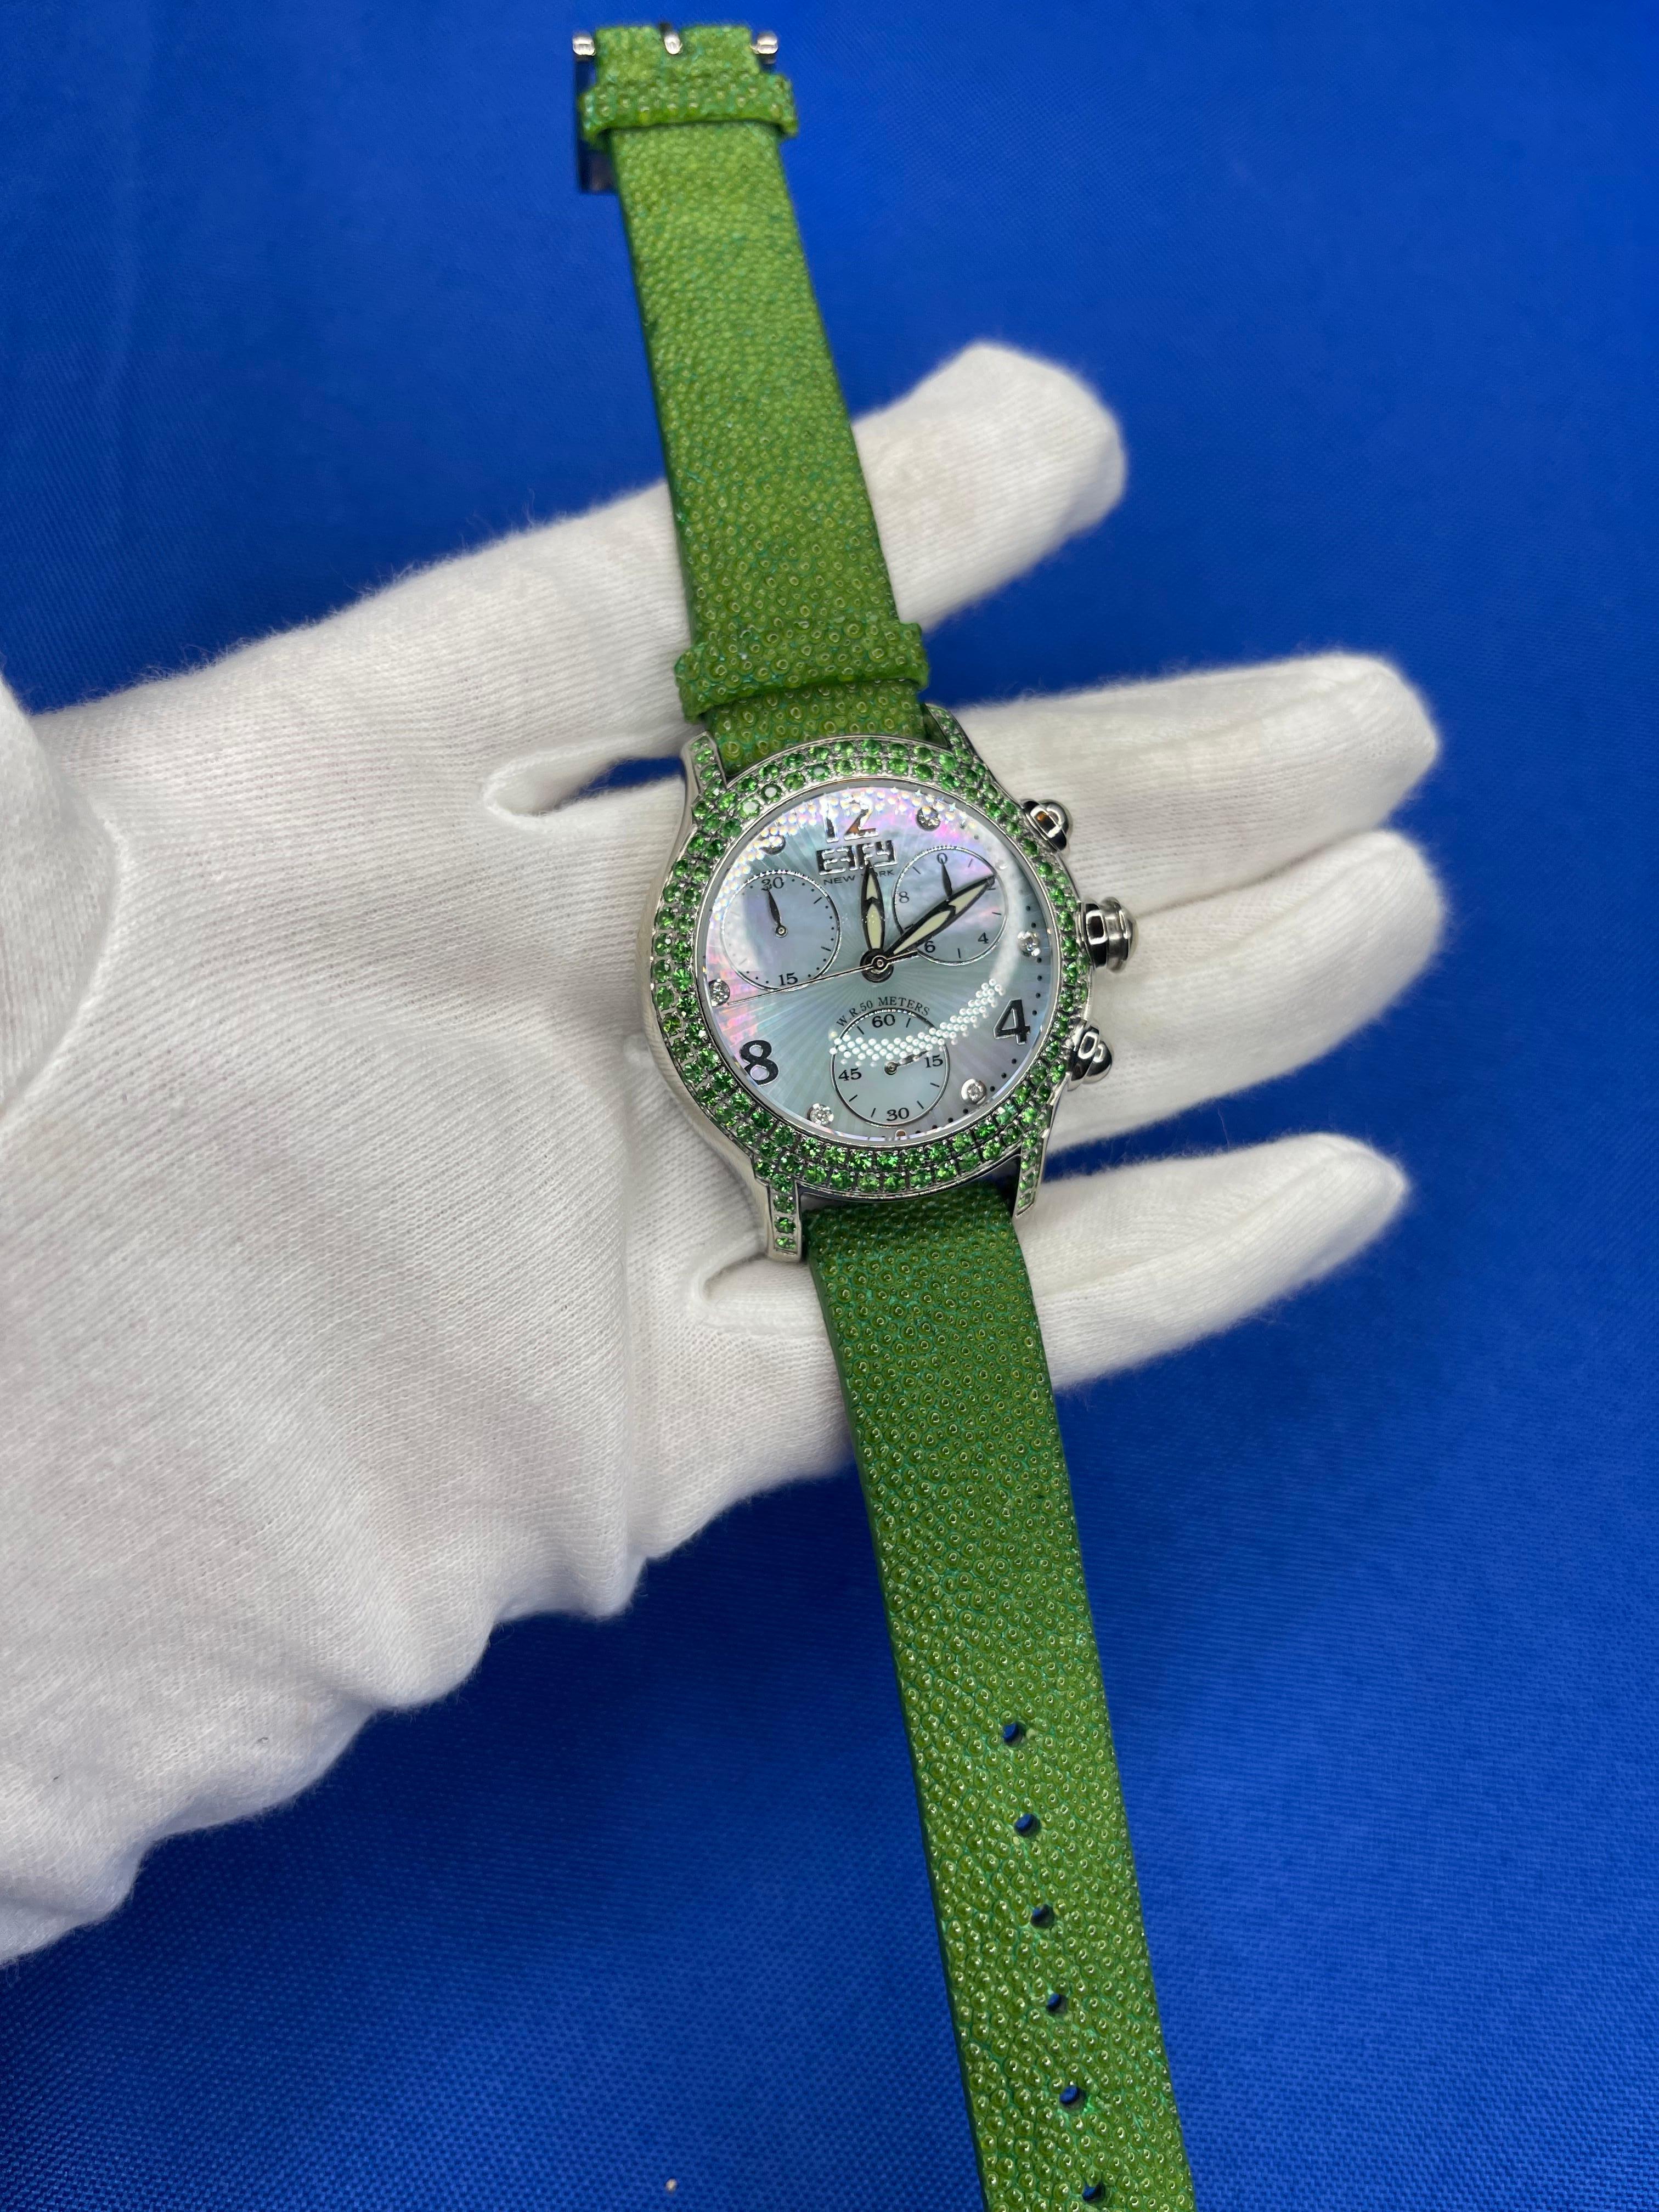 ·      Quality Swiss-Quartz movement guarantees precision timing
·         Mother-of-Pearl dial micro-paved with diamonds and gemstones enhances any dress style
·         Scratch-resistant sapphire glass lens
·         Genuine exotic lizard leather